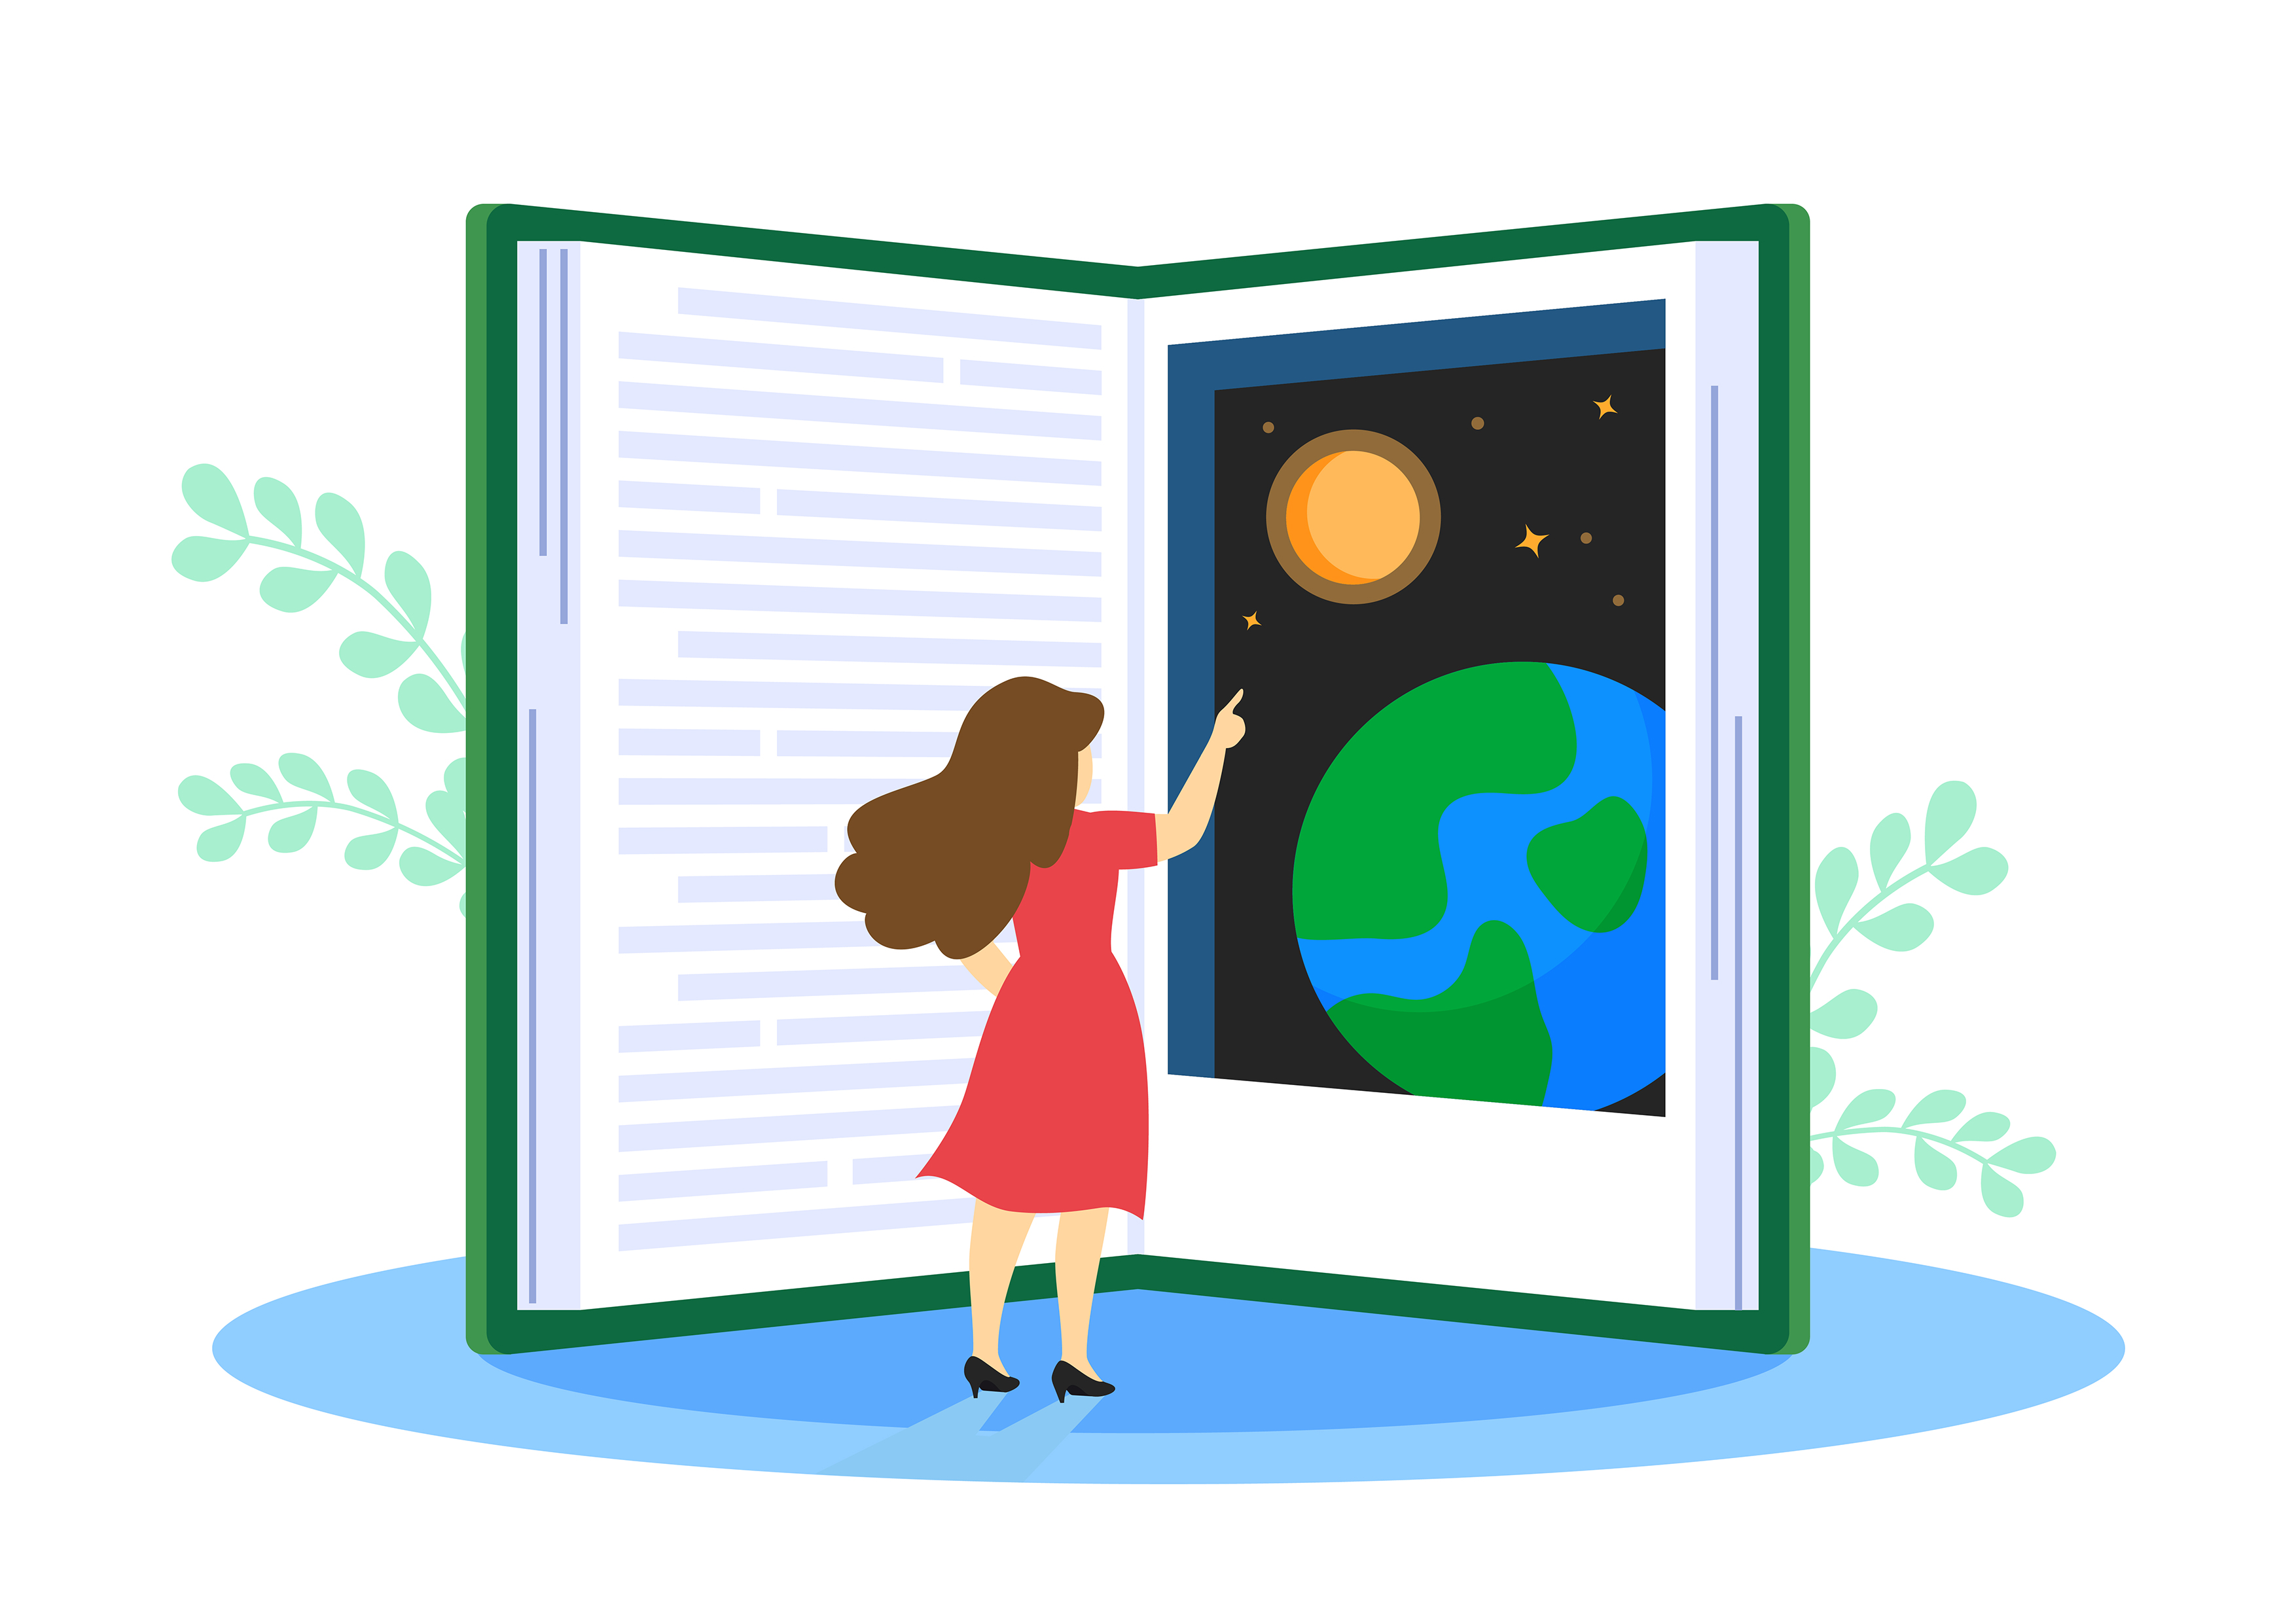 A girl opens a giant book and peers into an image of the sun, the earth, and the space.